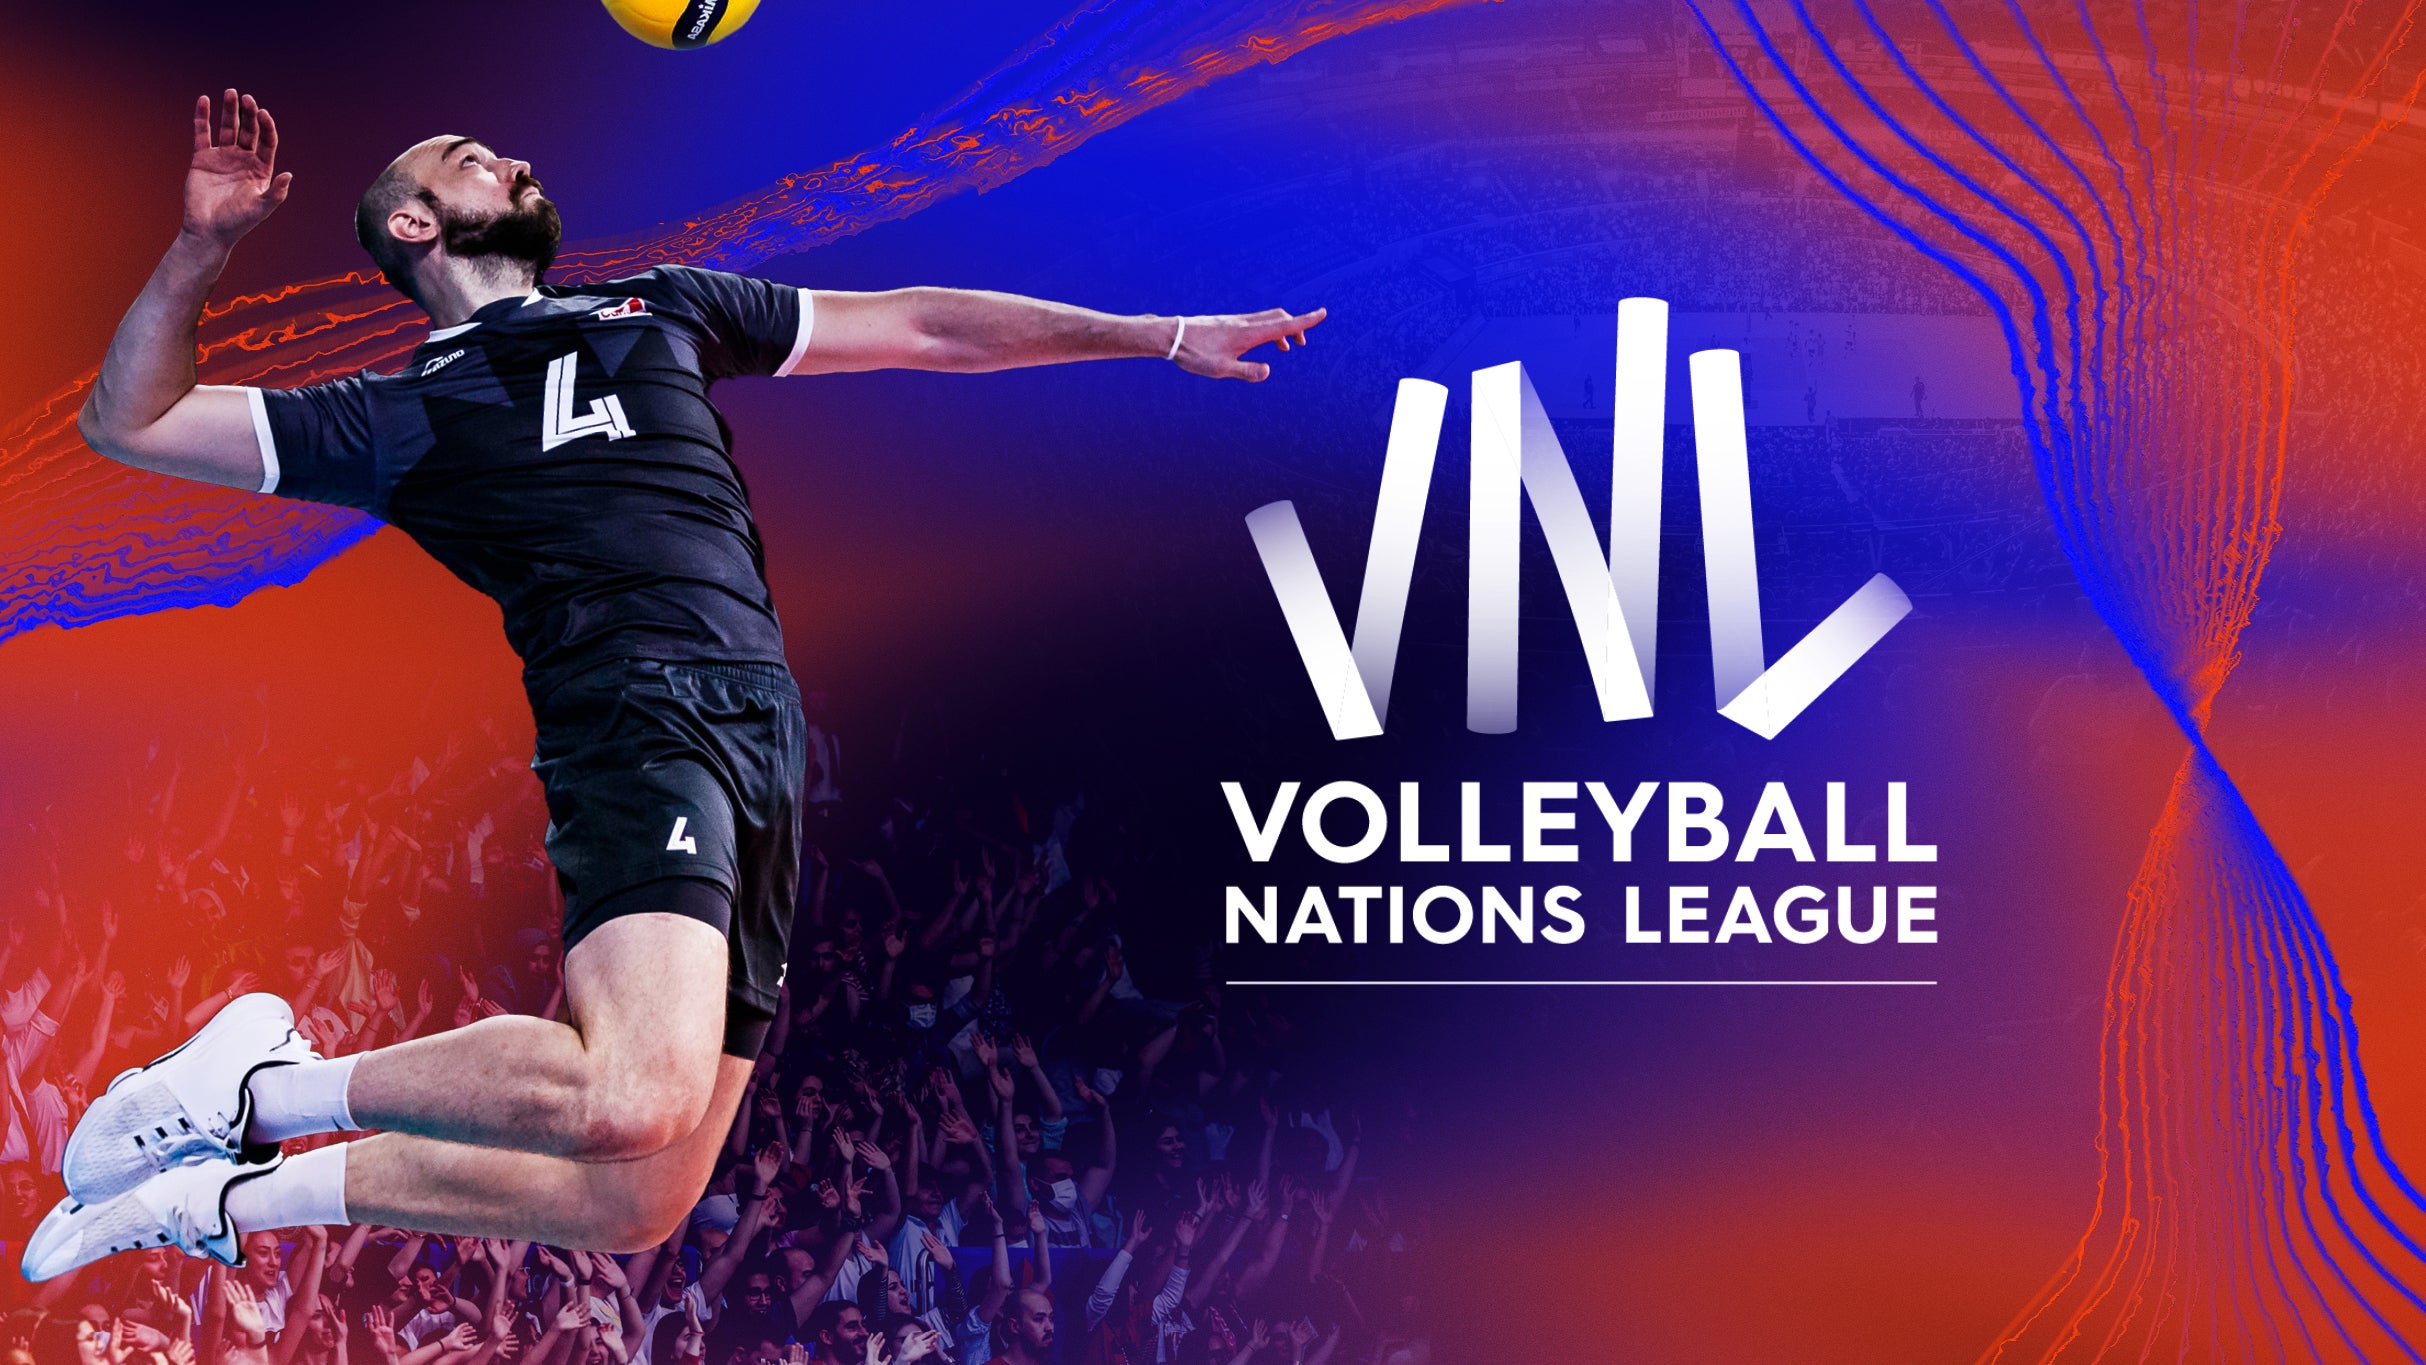 Volleyball Nations League - June 7 in Ottawa promo photo for TD Place Insider presale offer code